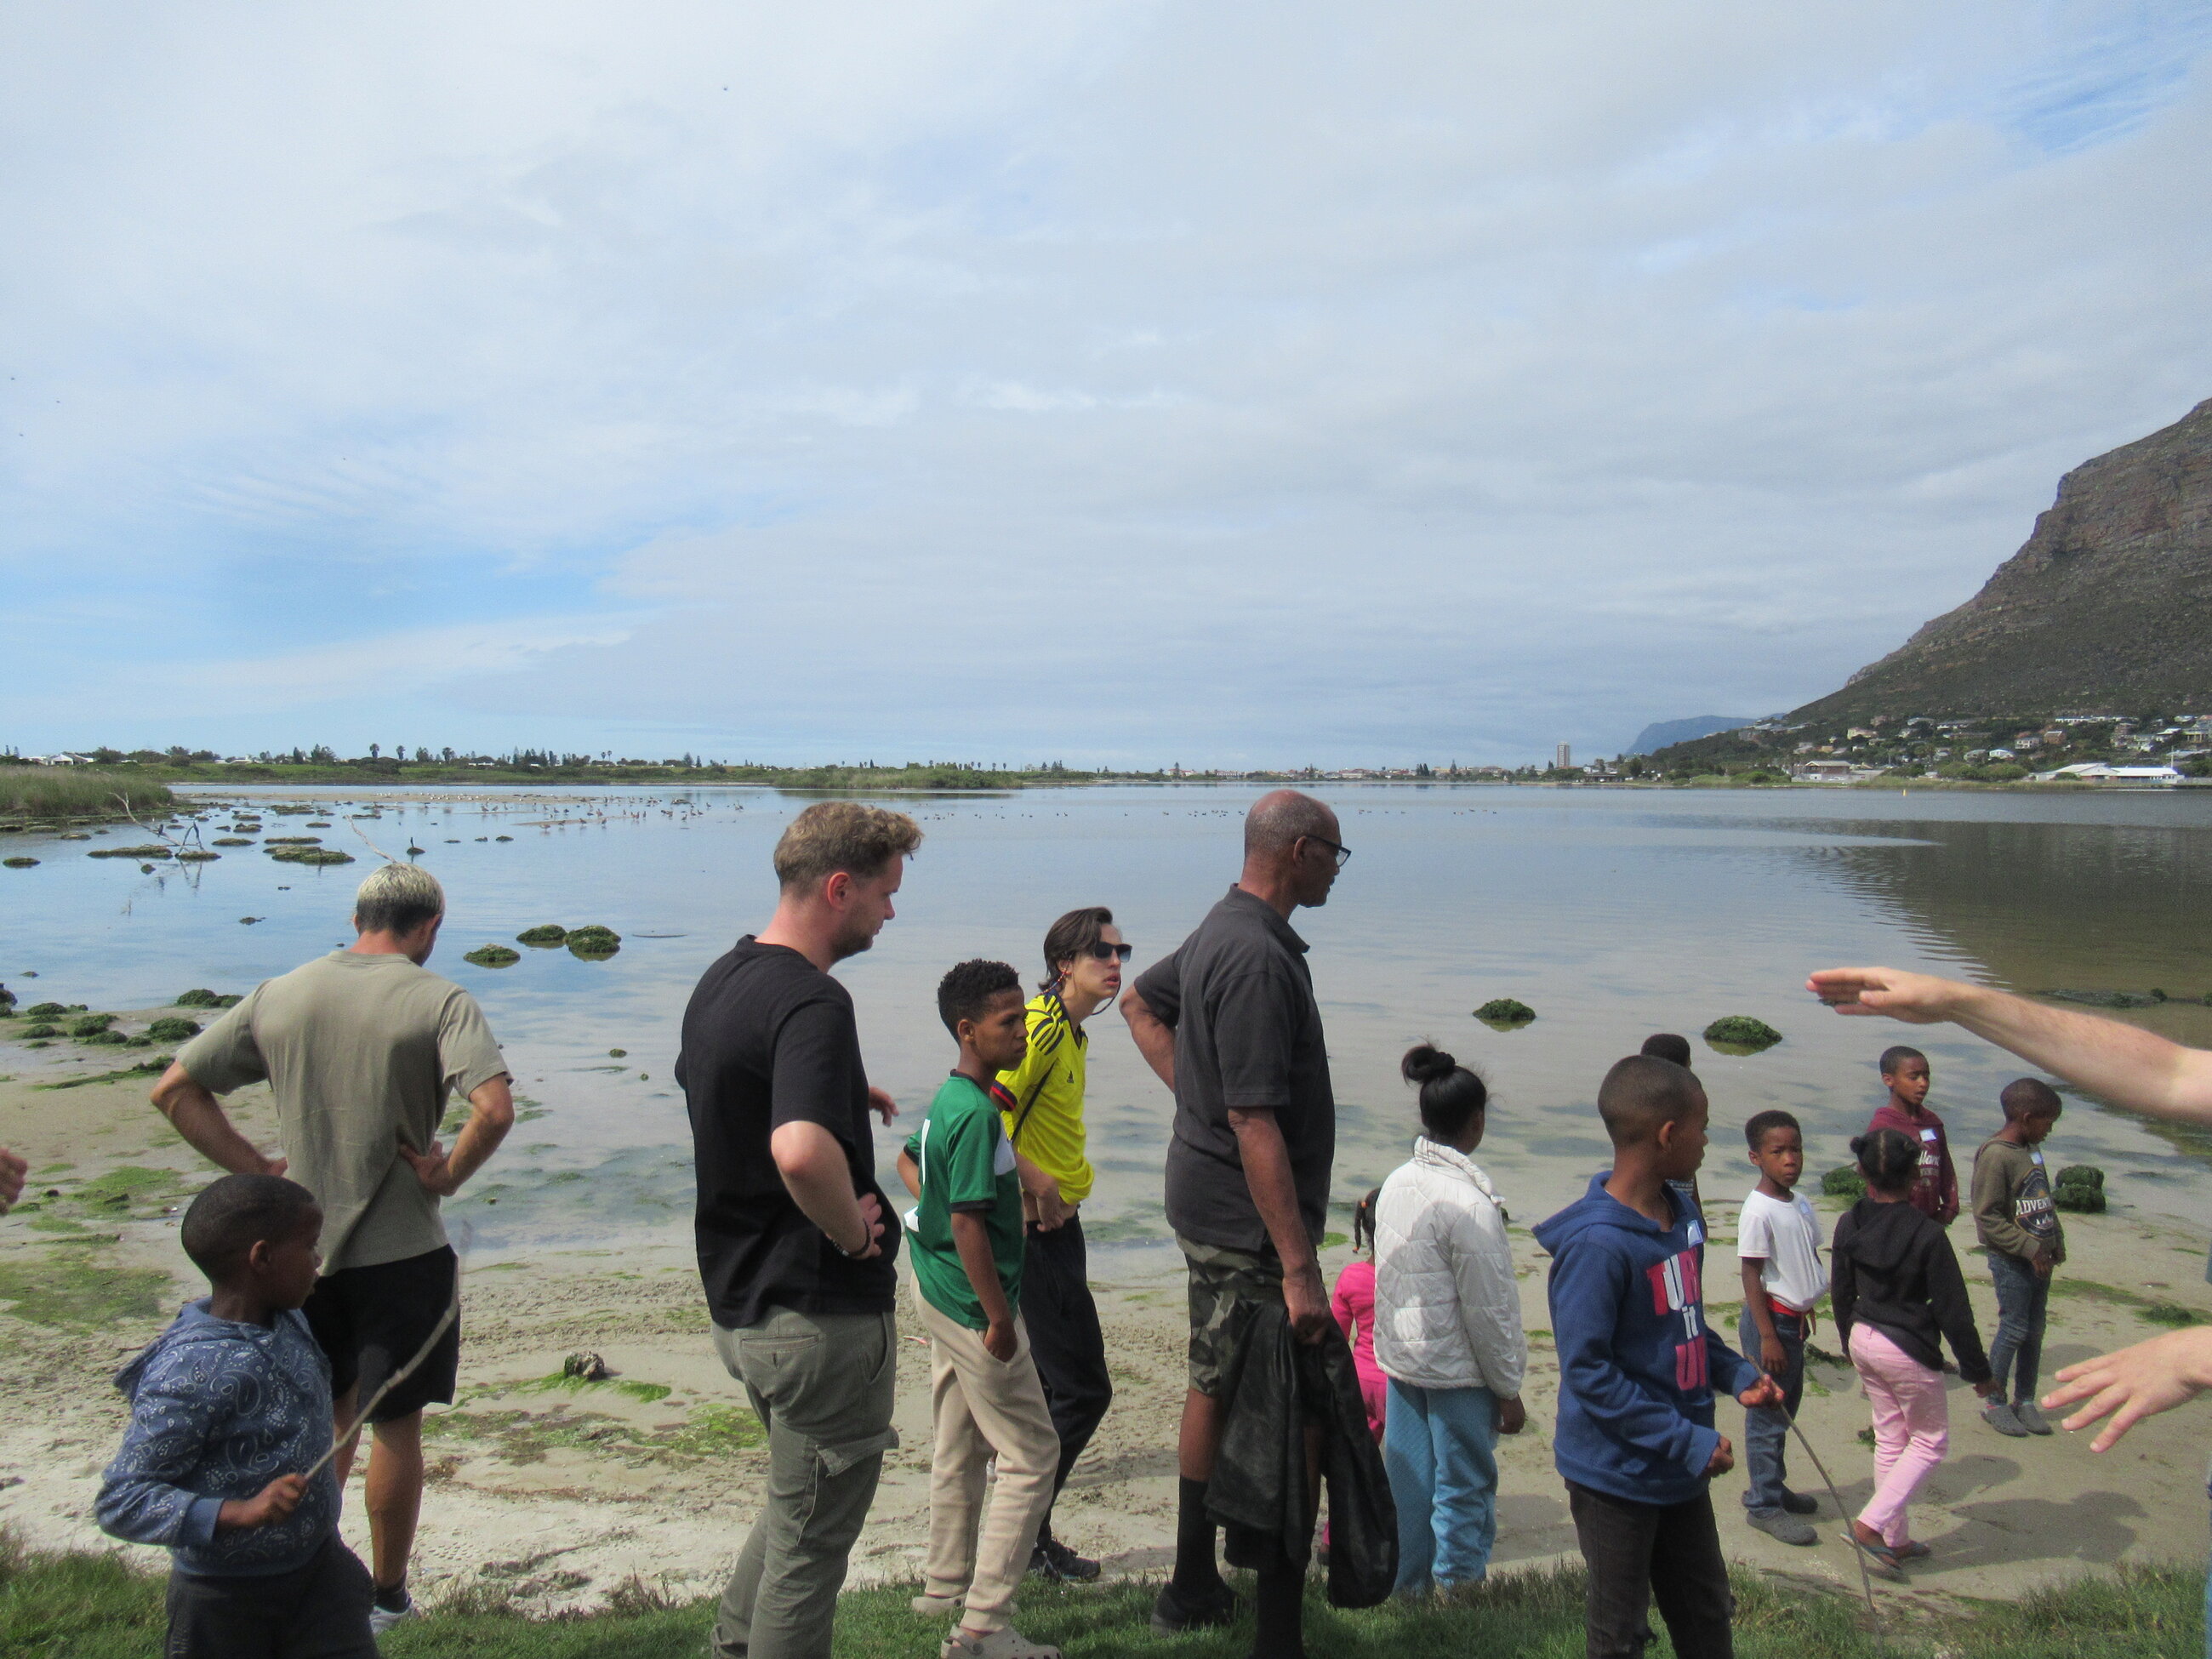 A morning at the Tidal pool, teaching water safety